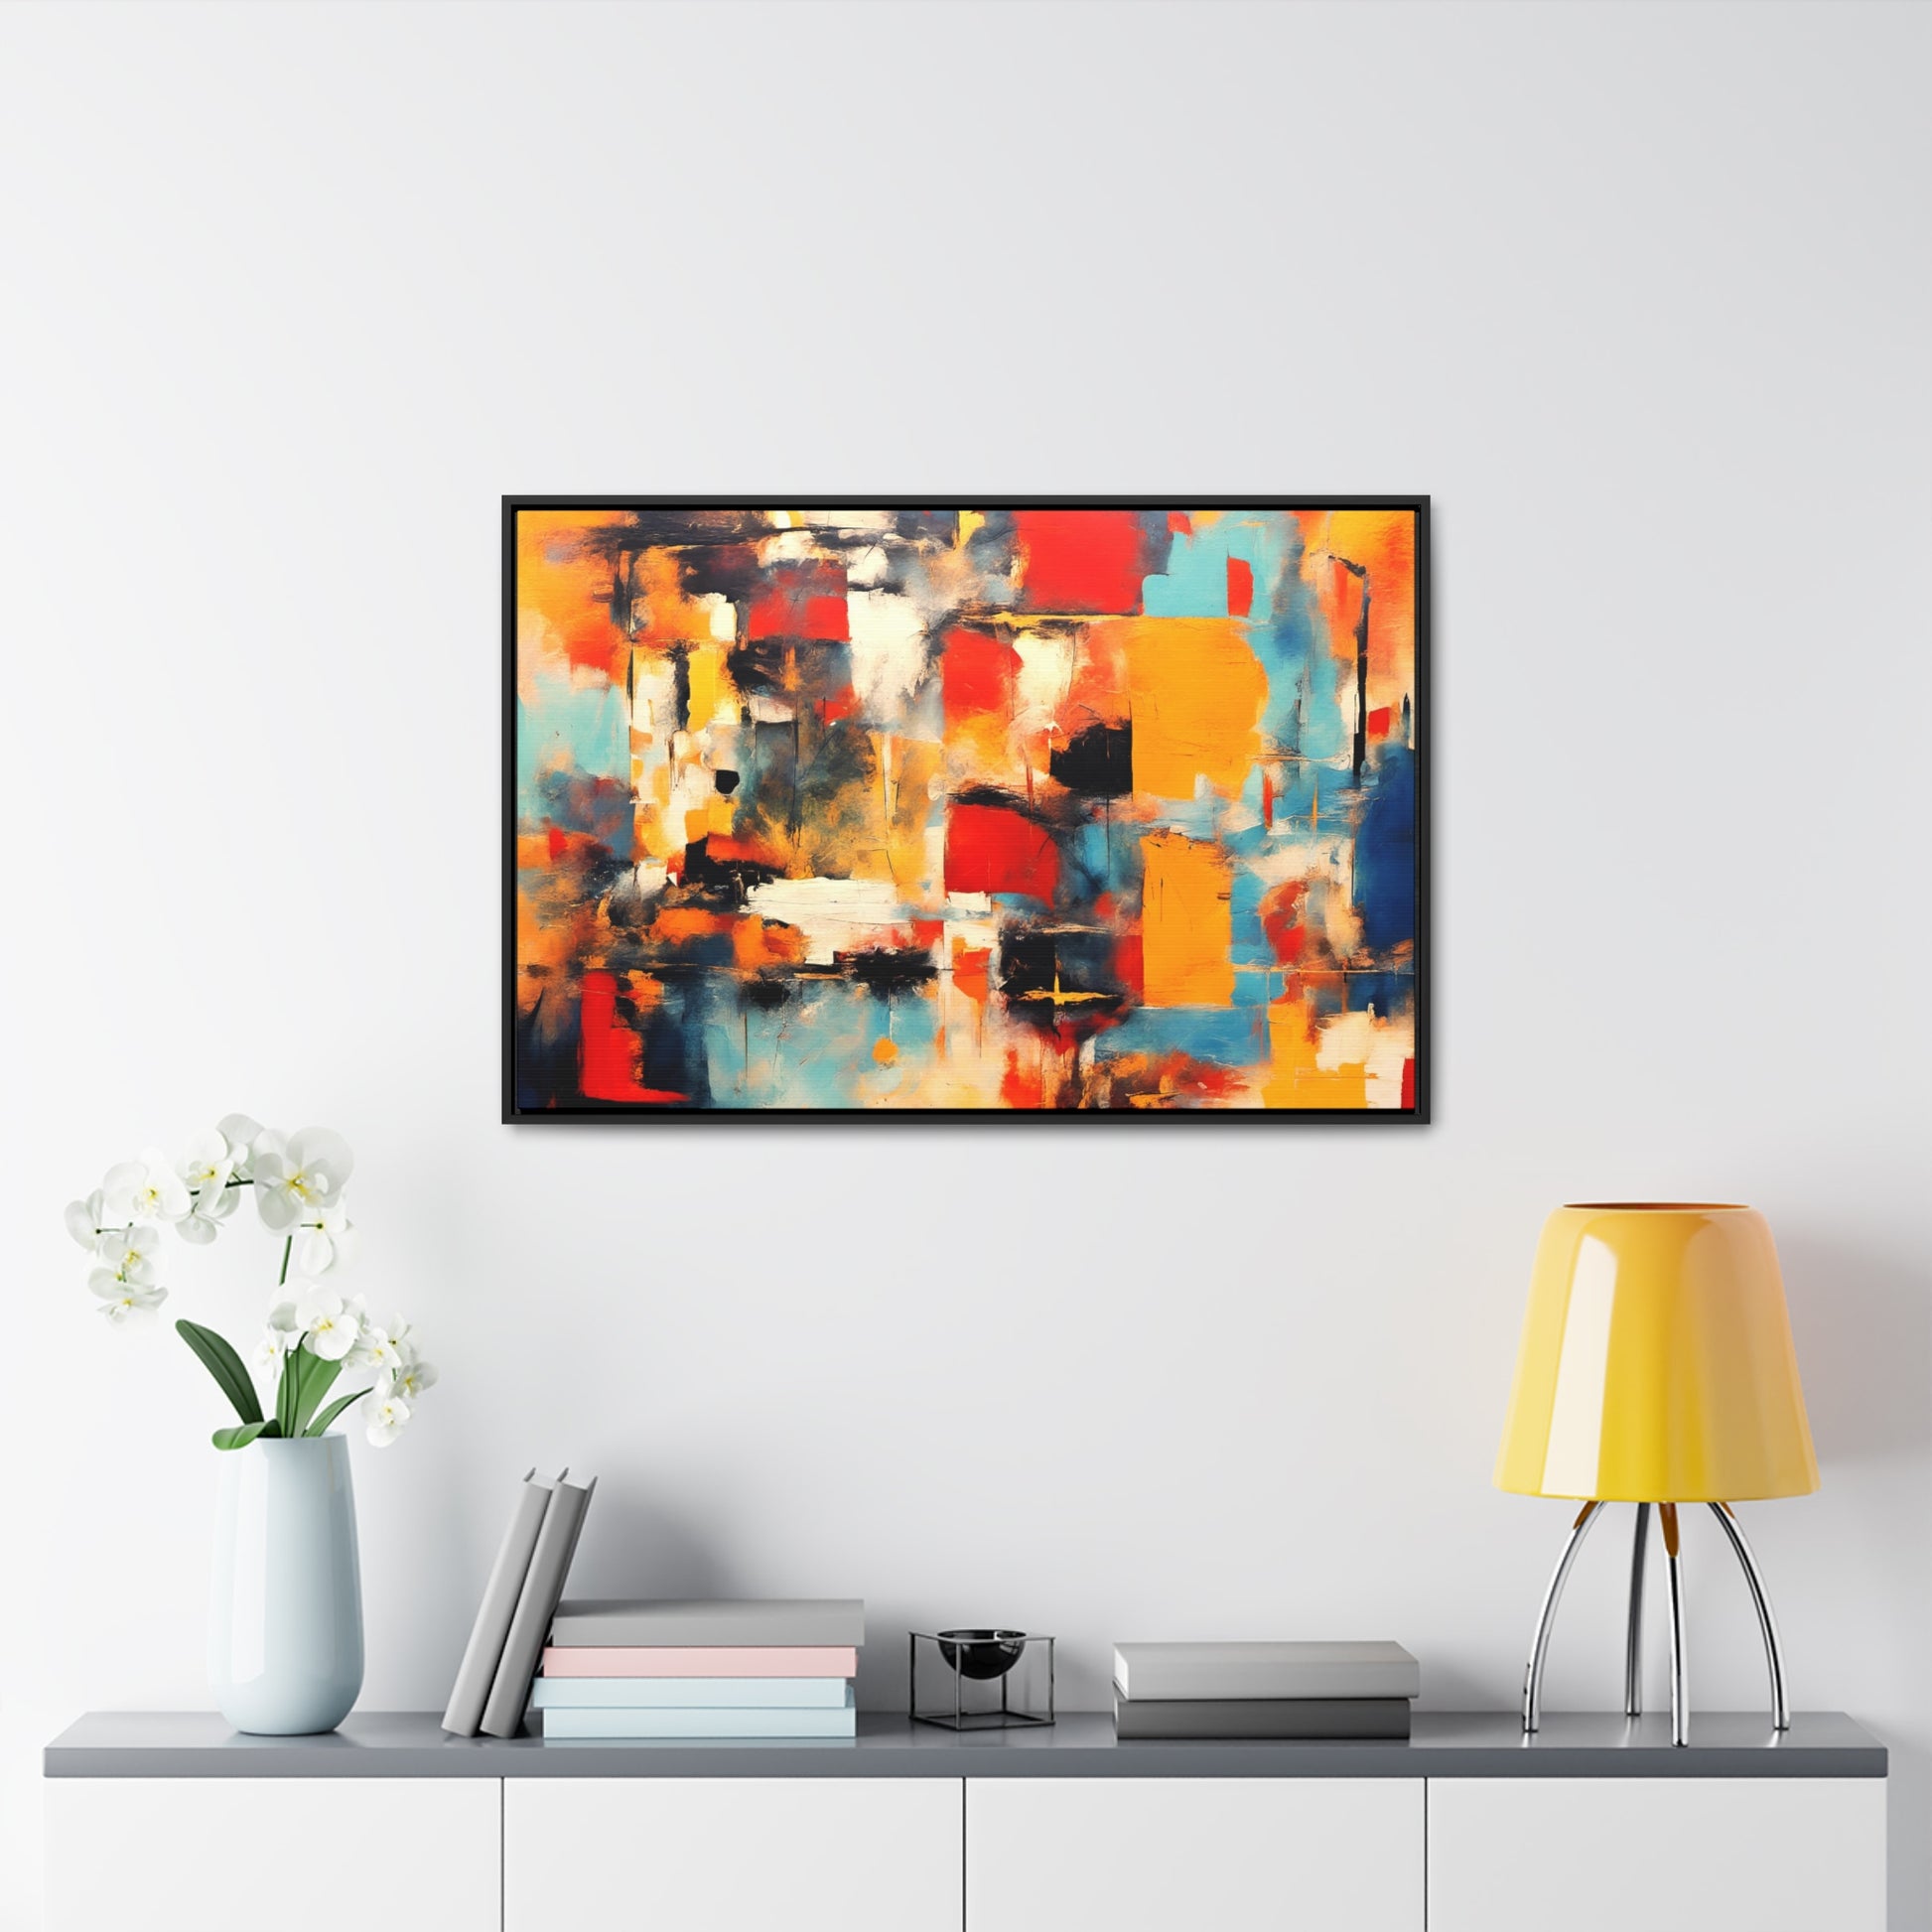 Modern Art Wall Print Reflection of Multicolor Patches in a Floating Frame 36x24